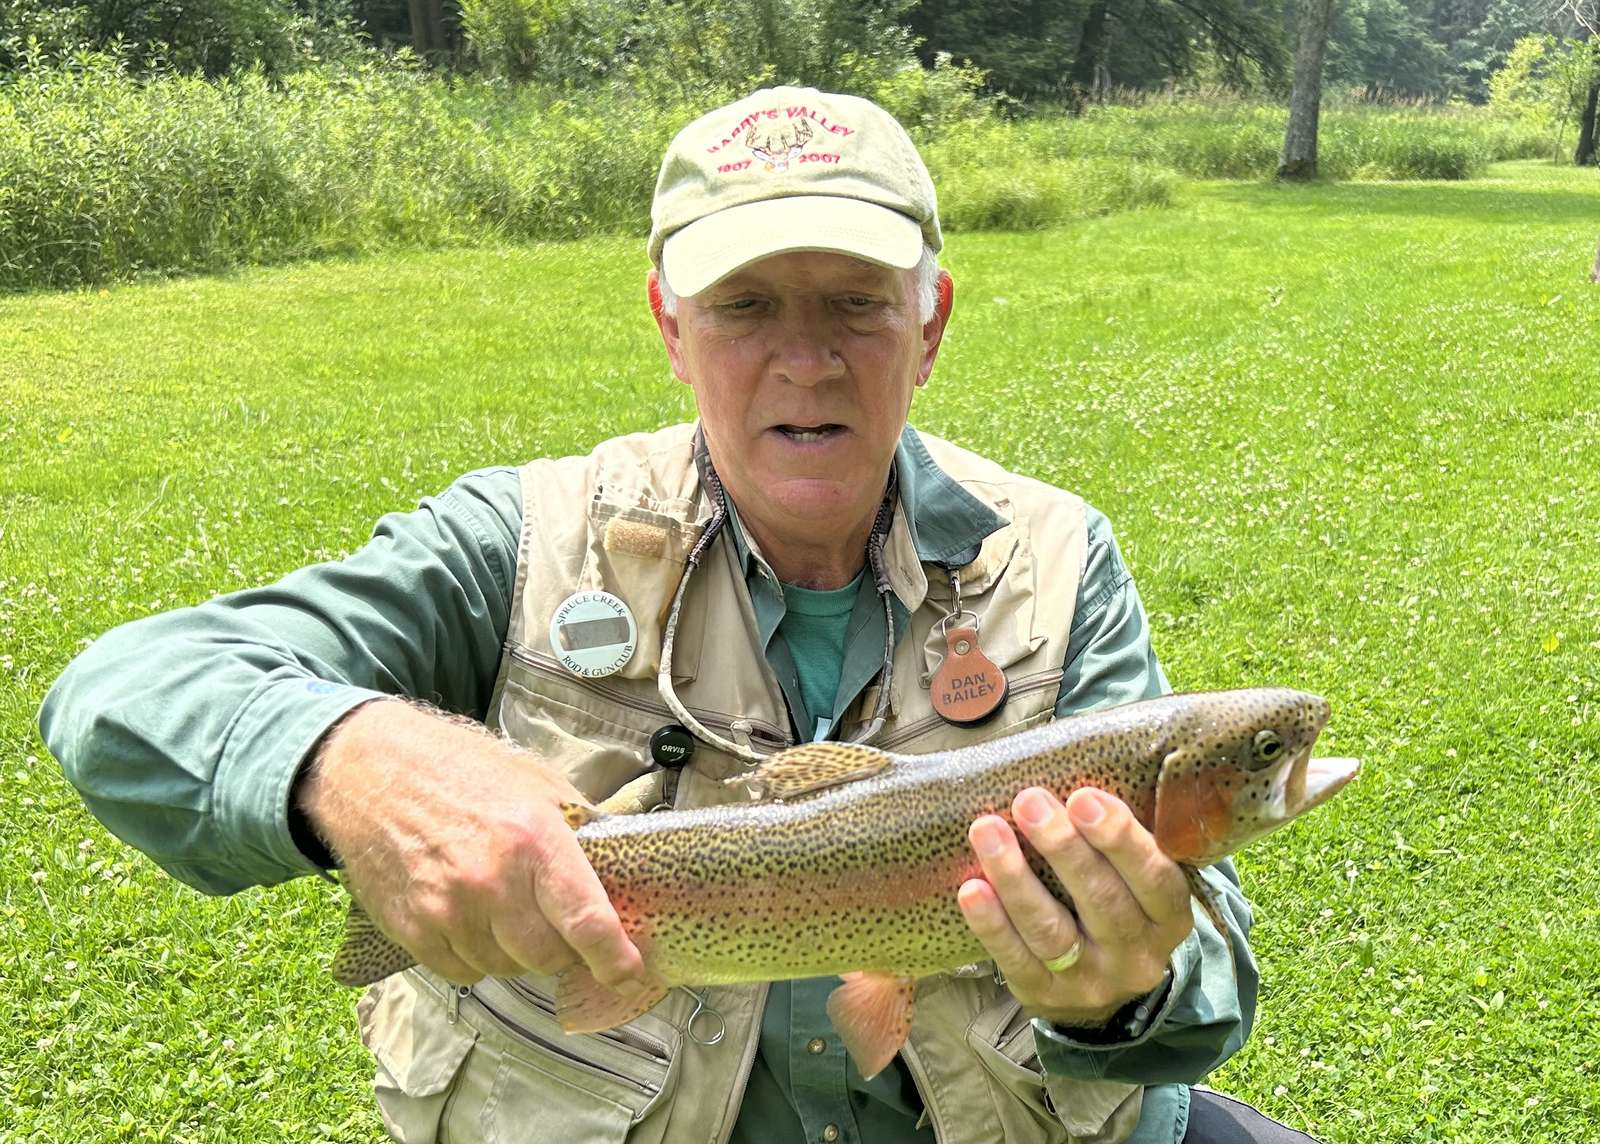 Pat With Trout puzzle online from photo